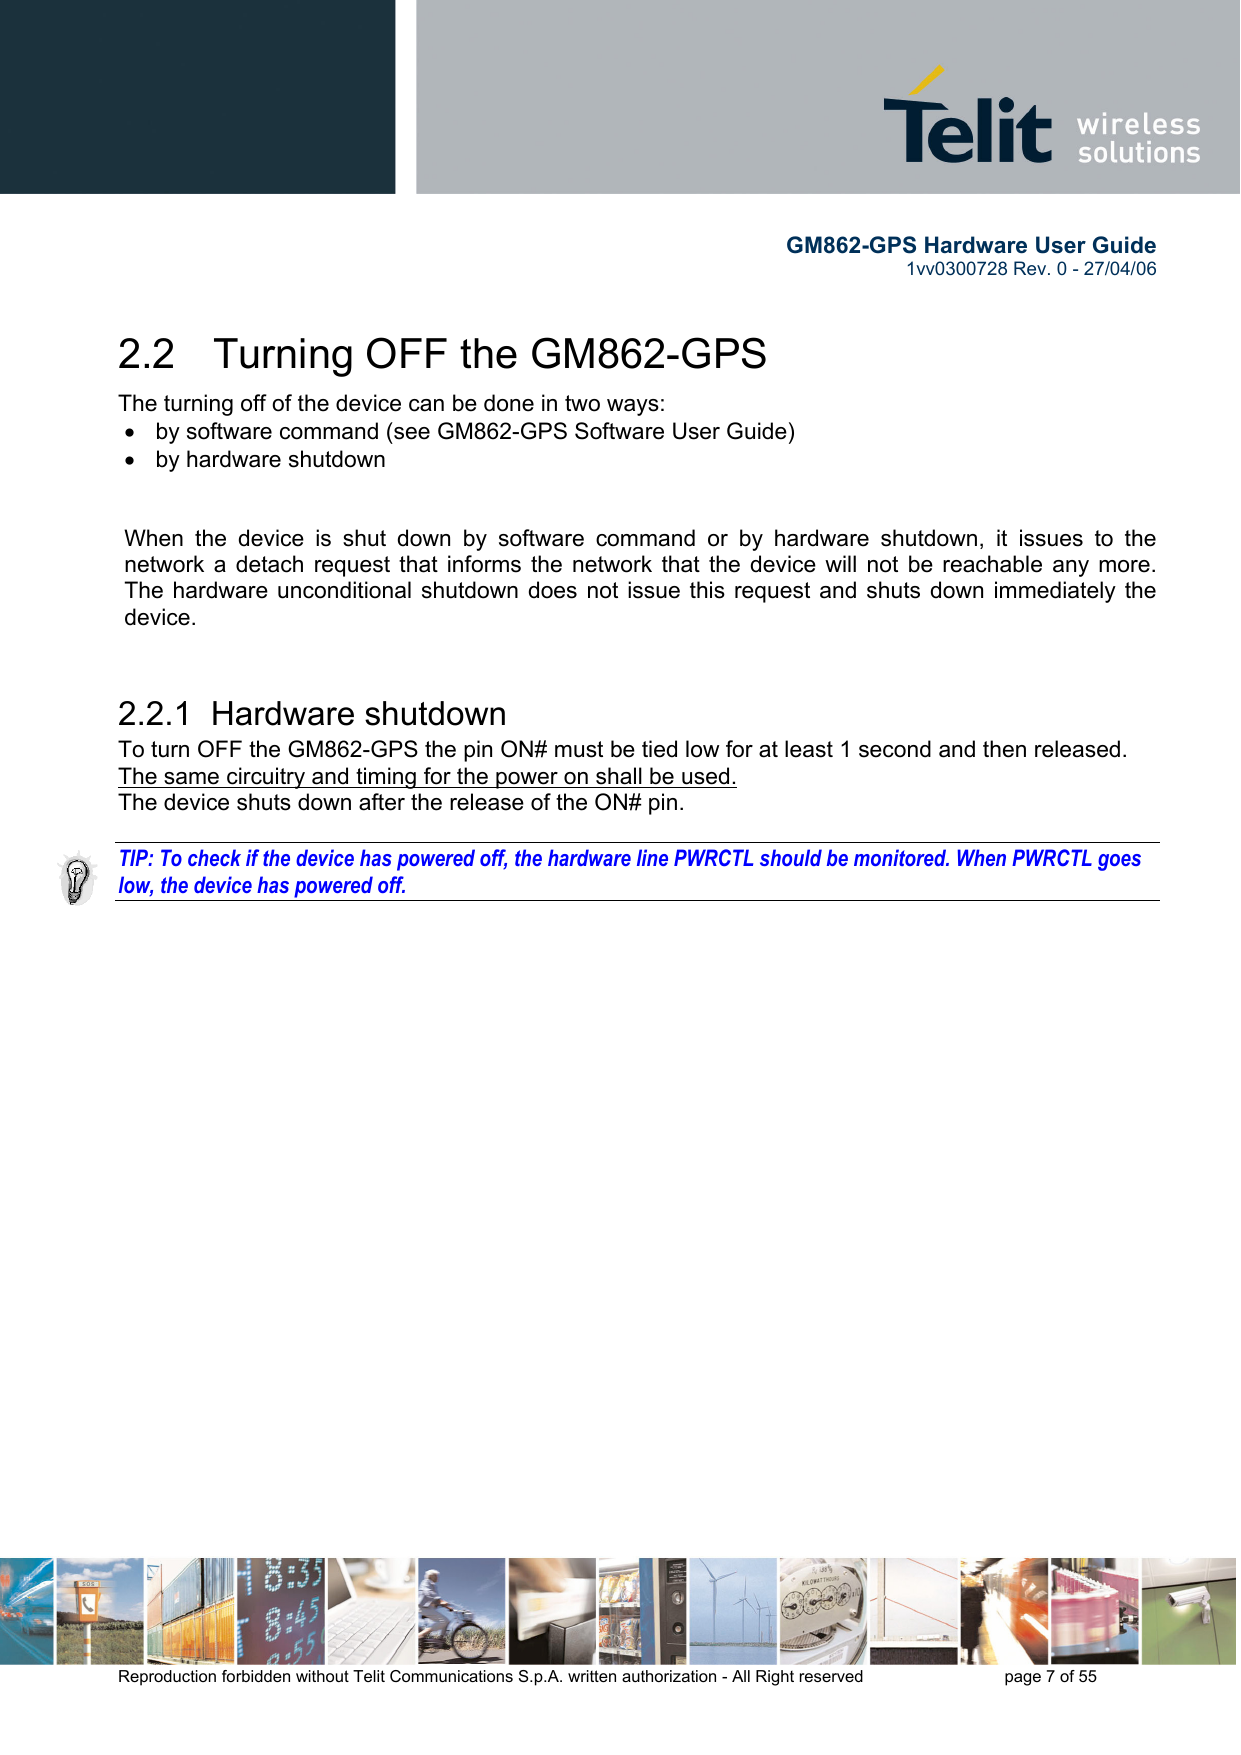        GM862-GPS Hardware User Guide   1vv0300728 Rev. 0 - 27/04/06    Reproduction forbidden without Telit Communications S.p.A. written authorization - All Right reserved    page 7 of 55  2.2   Turning OFF the GM862-GPS The turning off of the device can be done in two ways: •  by software command (see GM862-GPS Software User Guide) •  by hardware shutdown   When the device is shut down by software command or by hardware shutdown, it issues to the network a detach request that informs the network that the device will not be reachable any more. The hardware unconditional shutdown does not issue this request and shuts down immediately the device.  2.2.1  Hardware shutdown To turn OFF the GM862-GPS the pin ON# must be tied low for at least 1 second and then released. The same circuitry and timing for the power on shall be used. The device shuts down after the release of the ON# pin.  TIP: To check if the device has powered off, the hardware line PWRCTL should be monitored. When PWRCTL goes low, the device has powered off. 